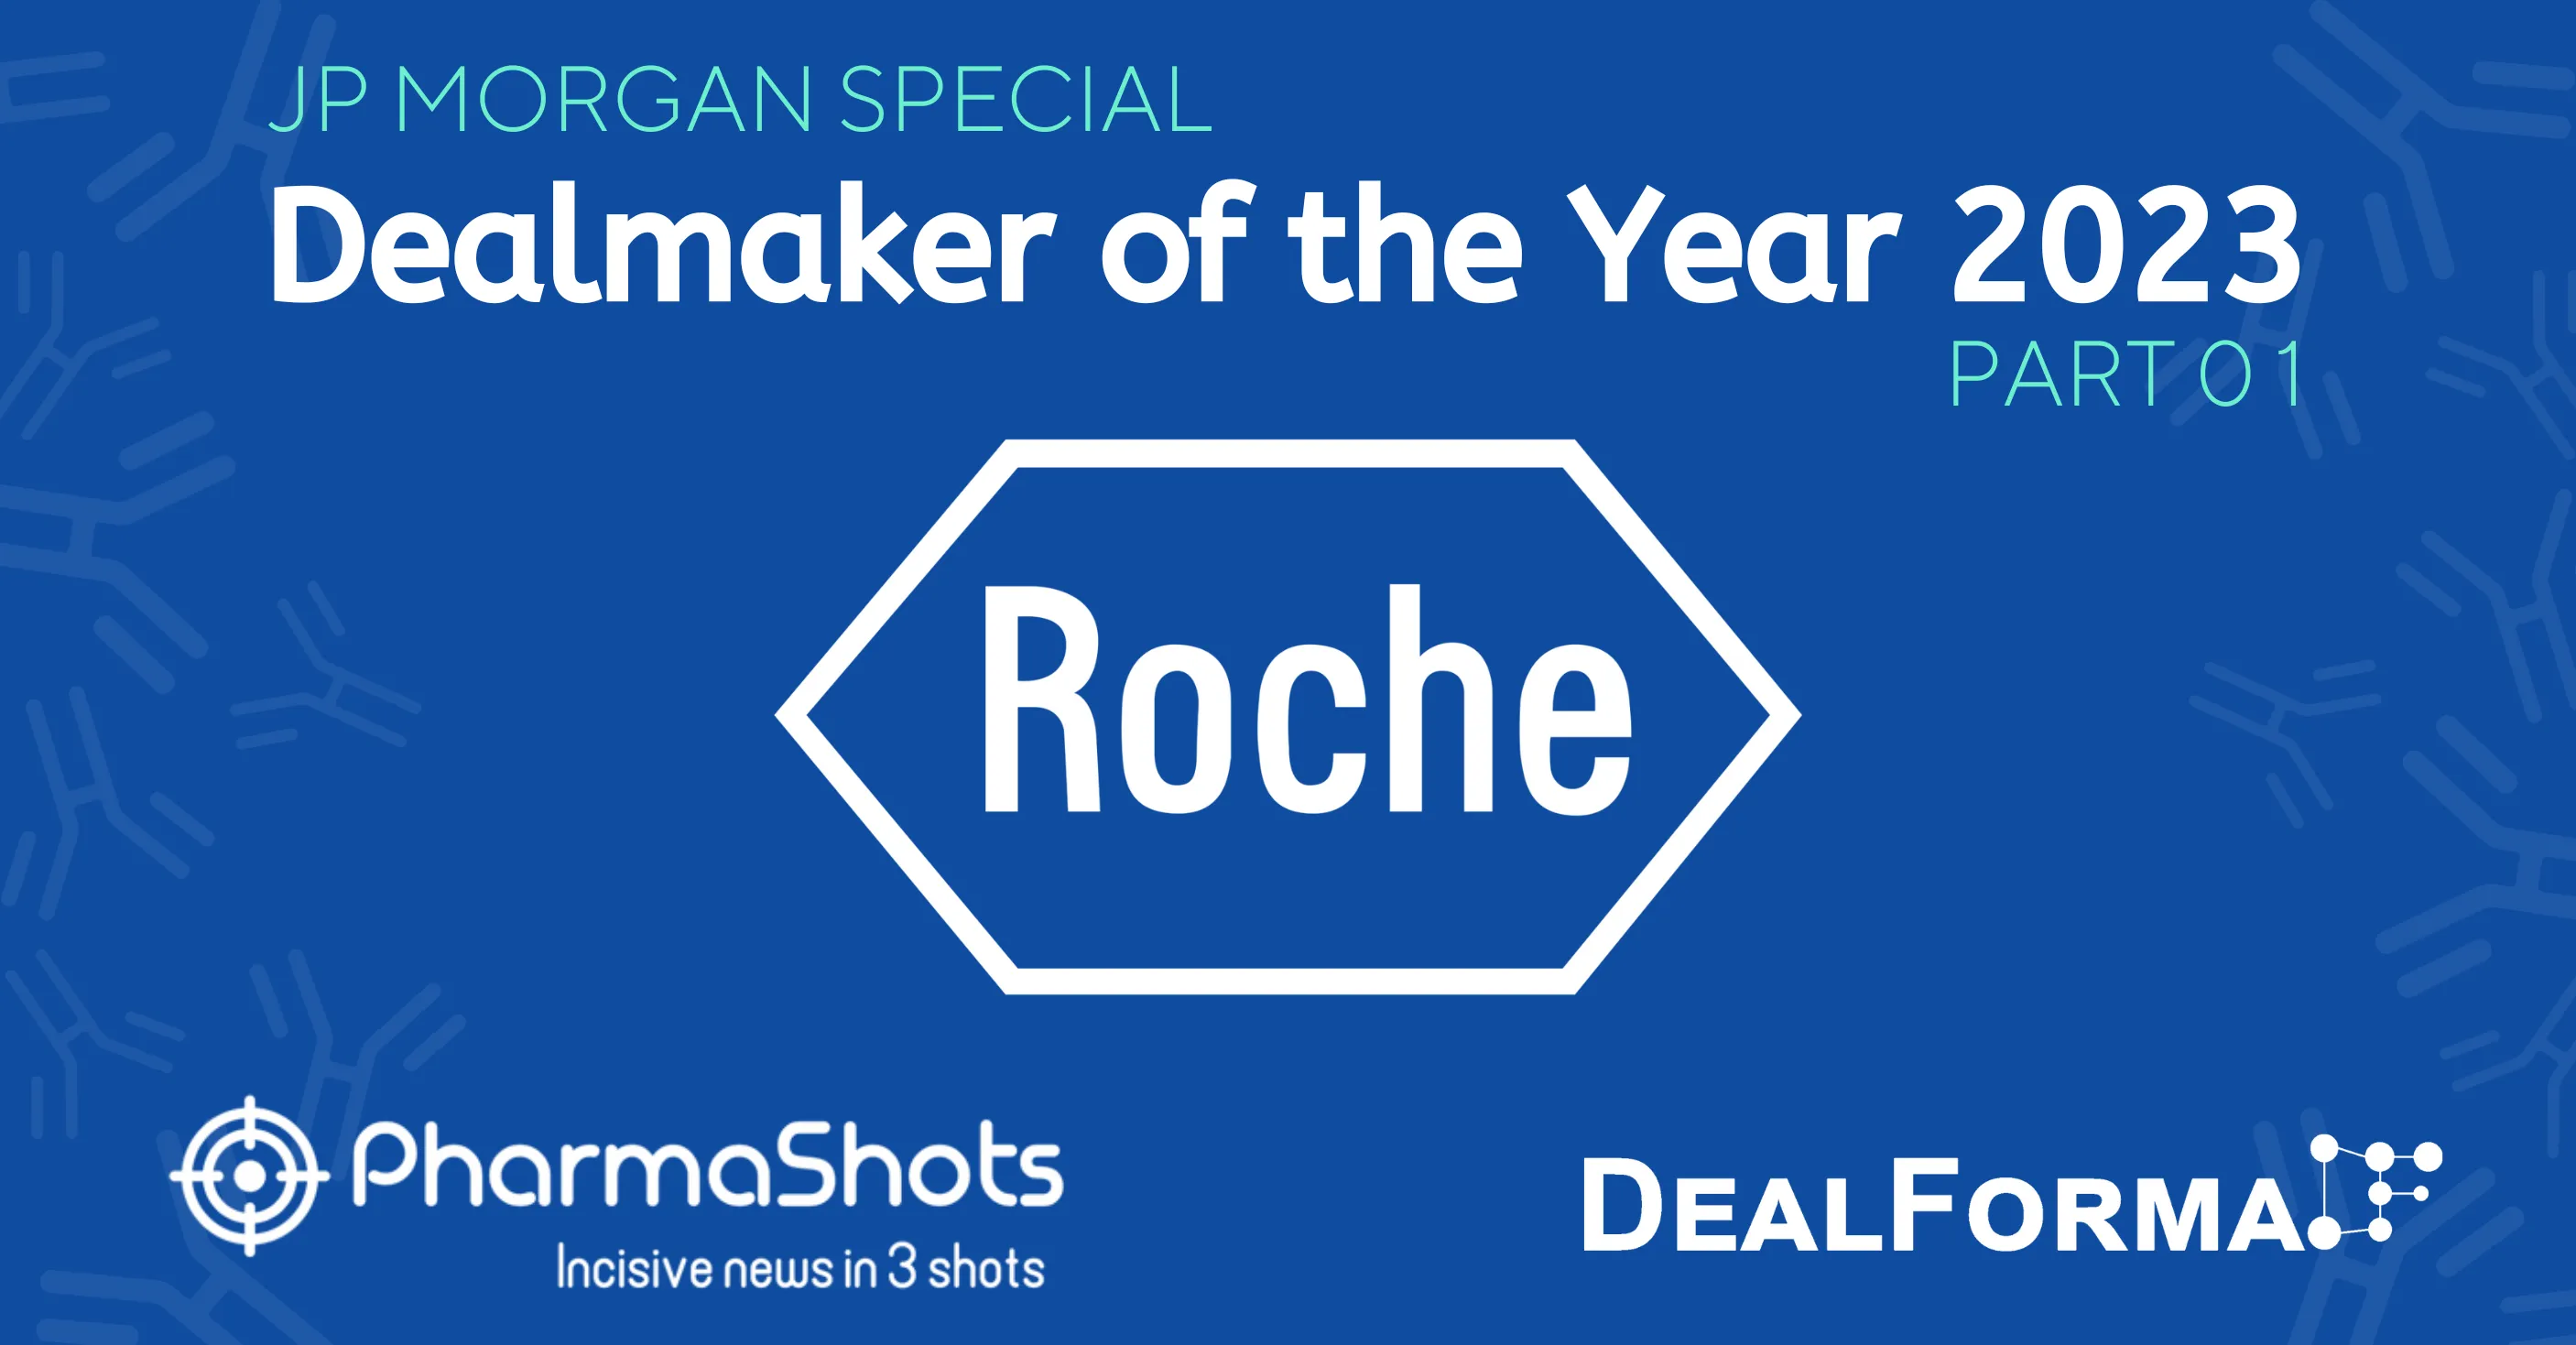 JP Morgan Special: Deal Maker of the Year 2023 (Part 01)